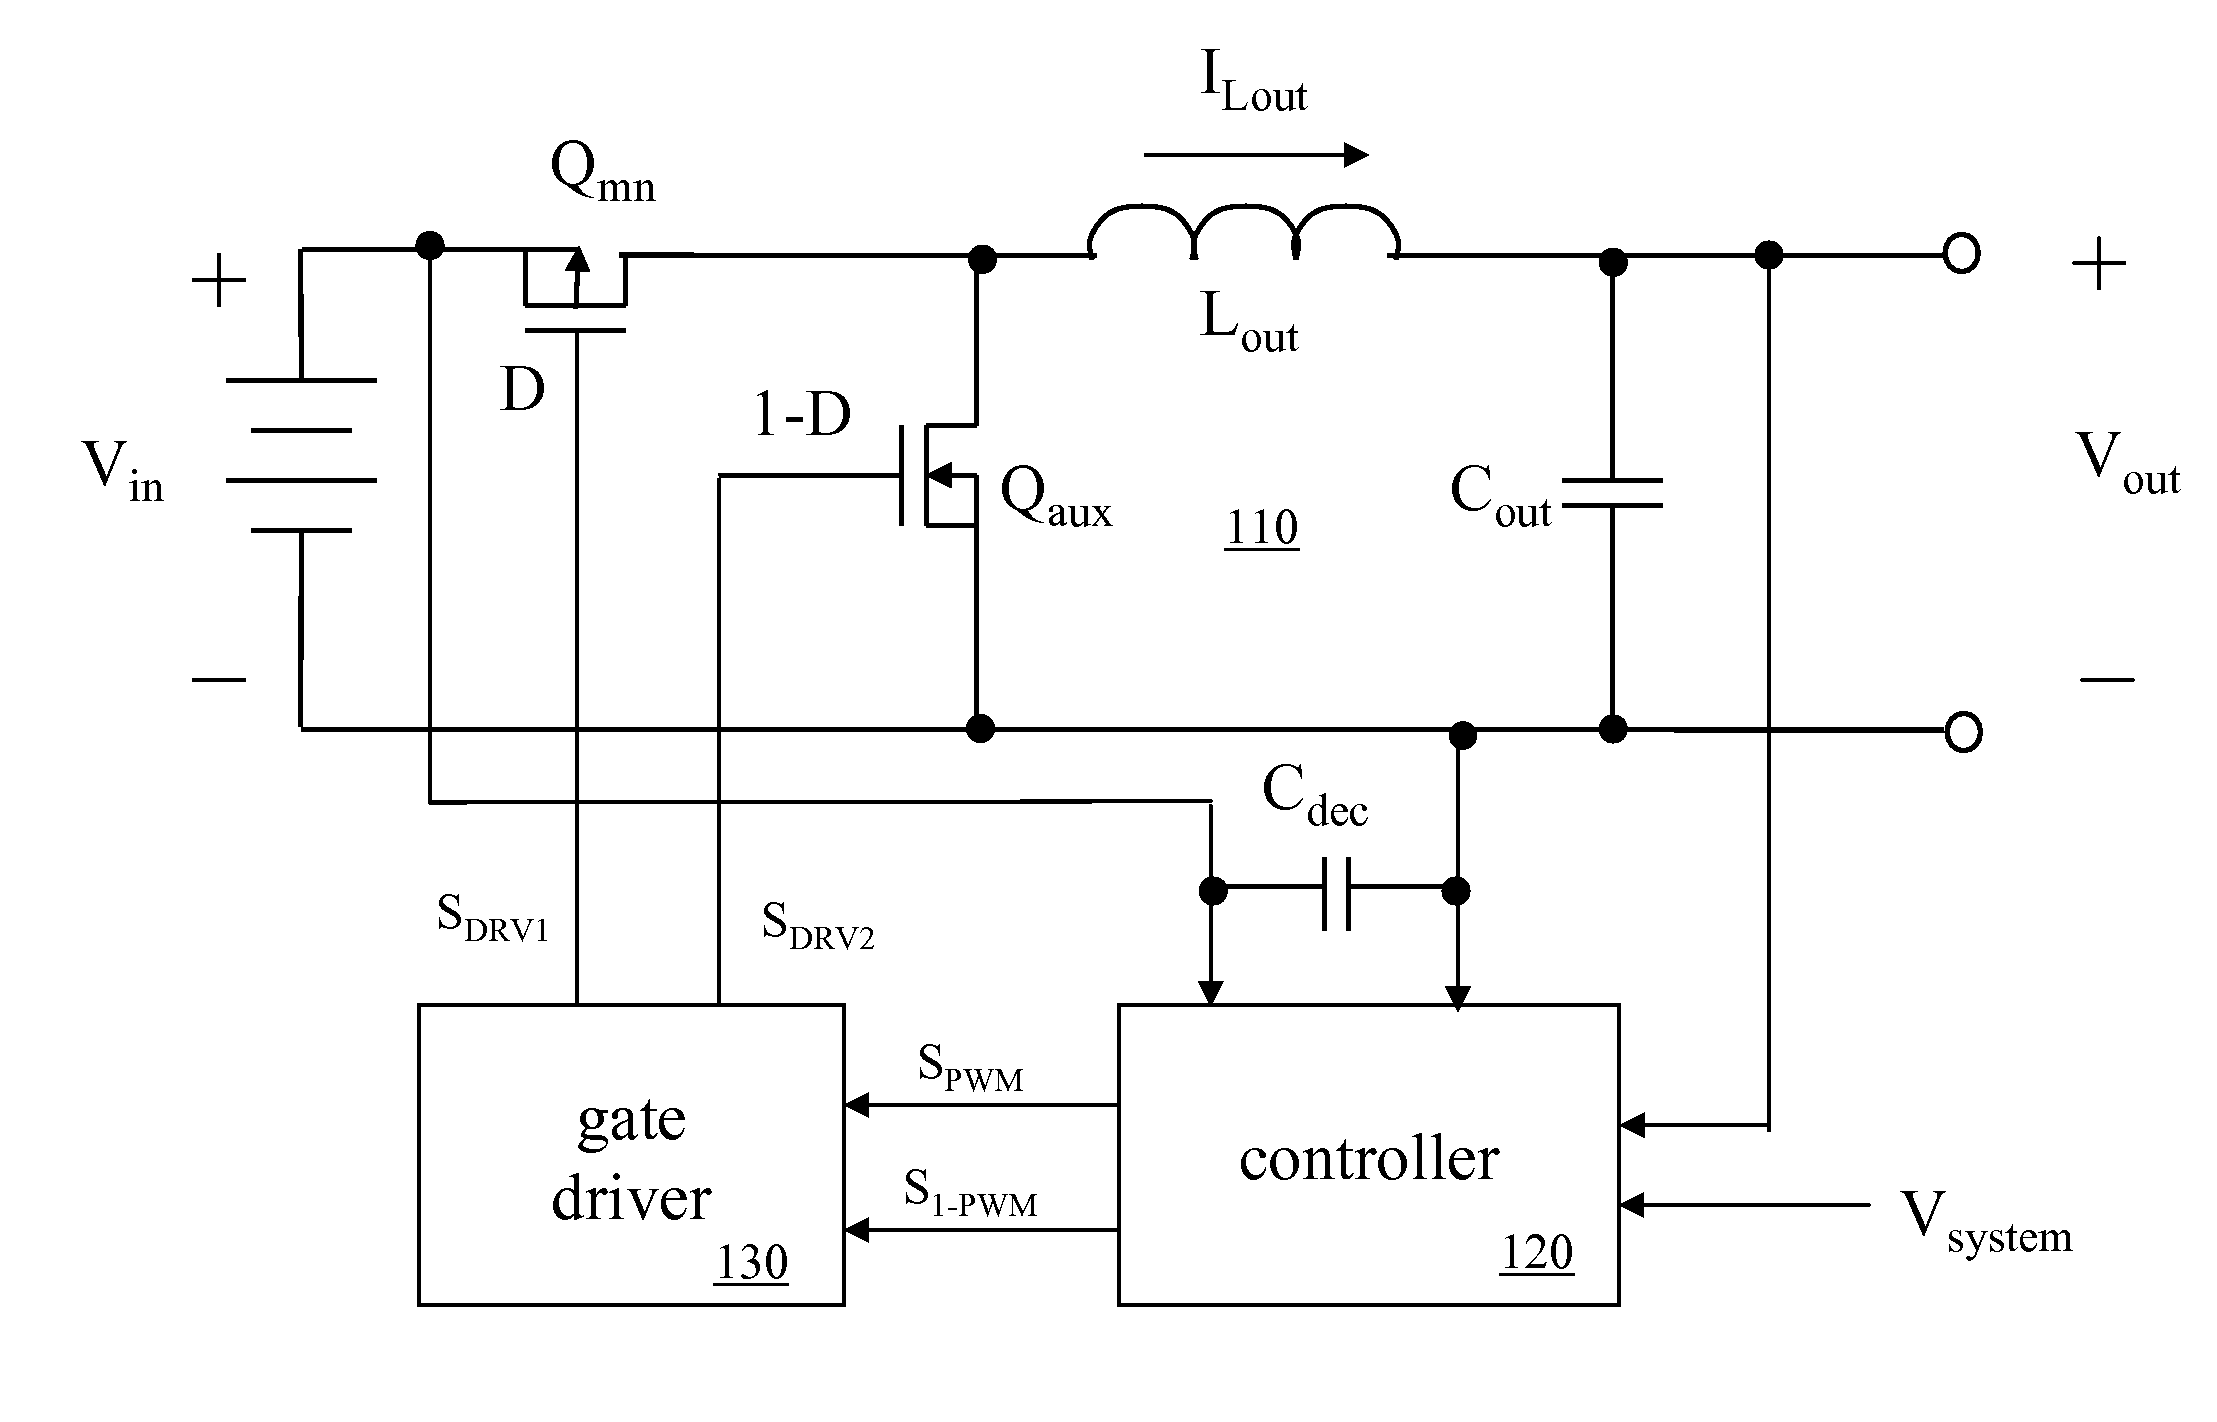 Power Converter with Monotonic Turn-On for Pre-Charged Output Capacitor